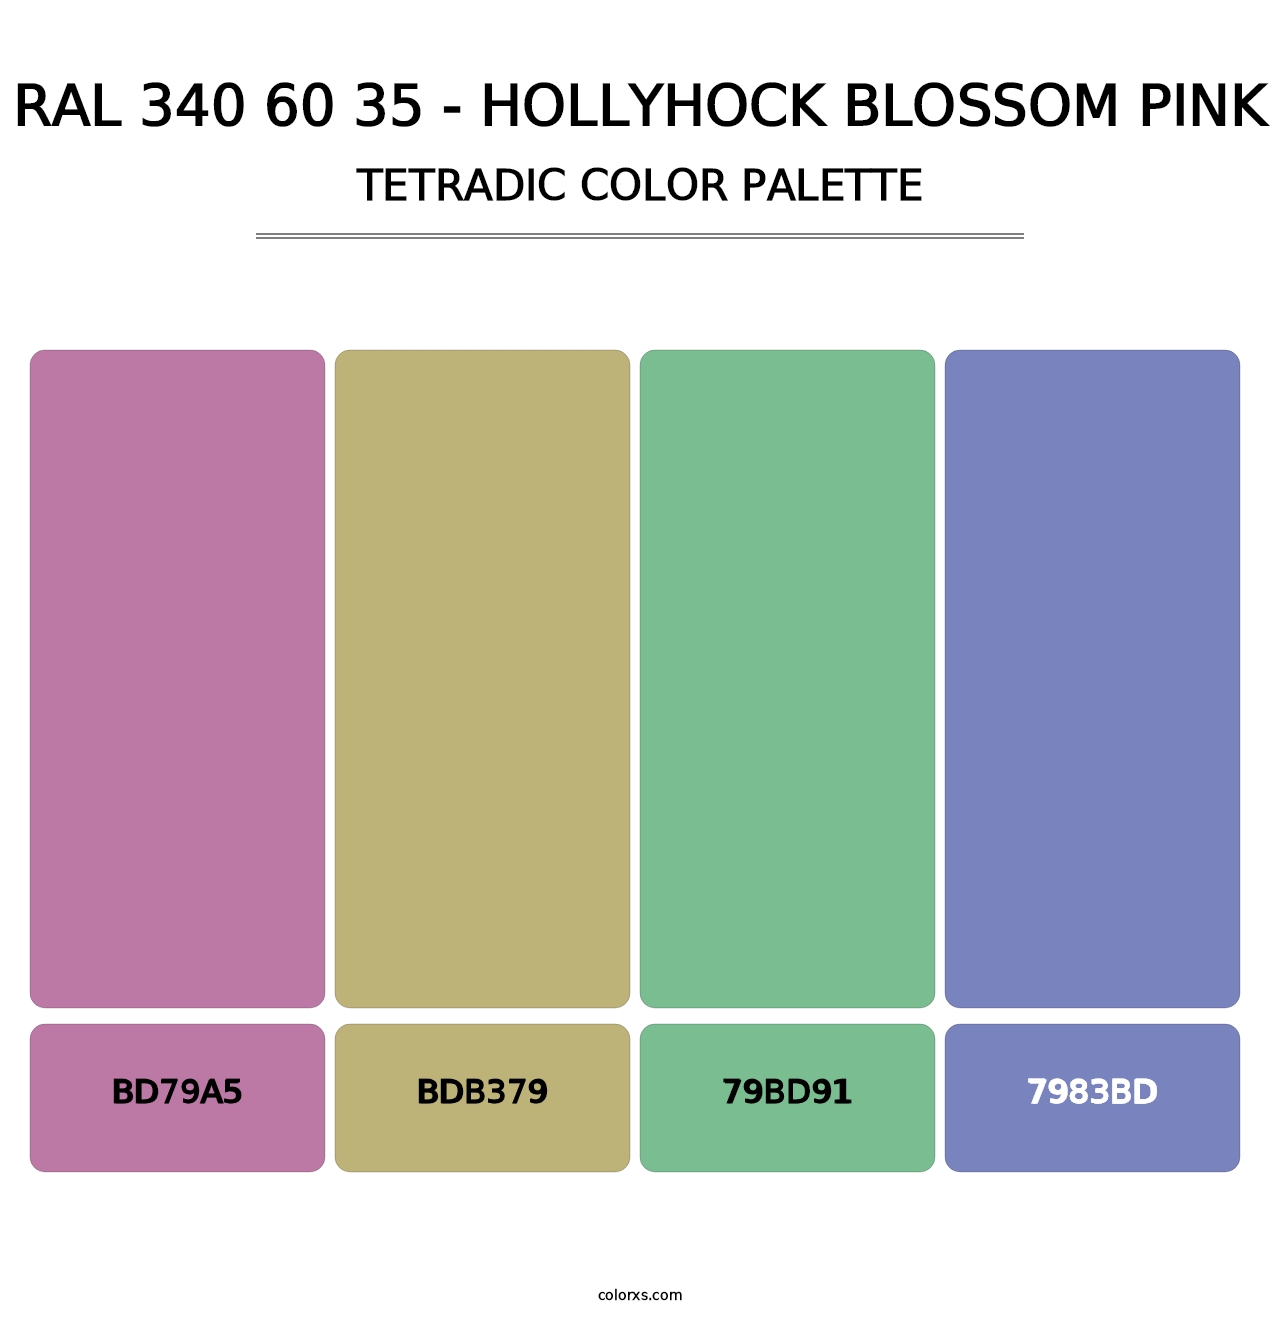 RAL 340 60 35 - Hollyhock Blossom Pink - Tetradic Color Palette